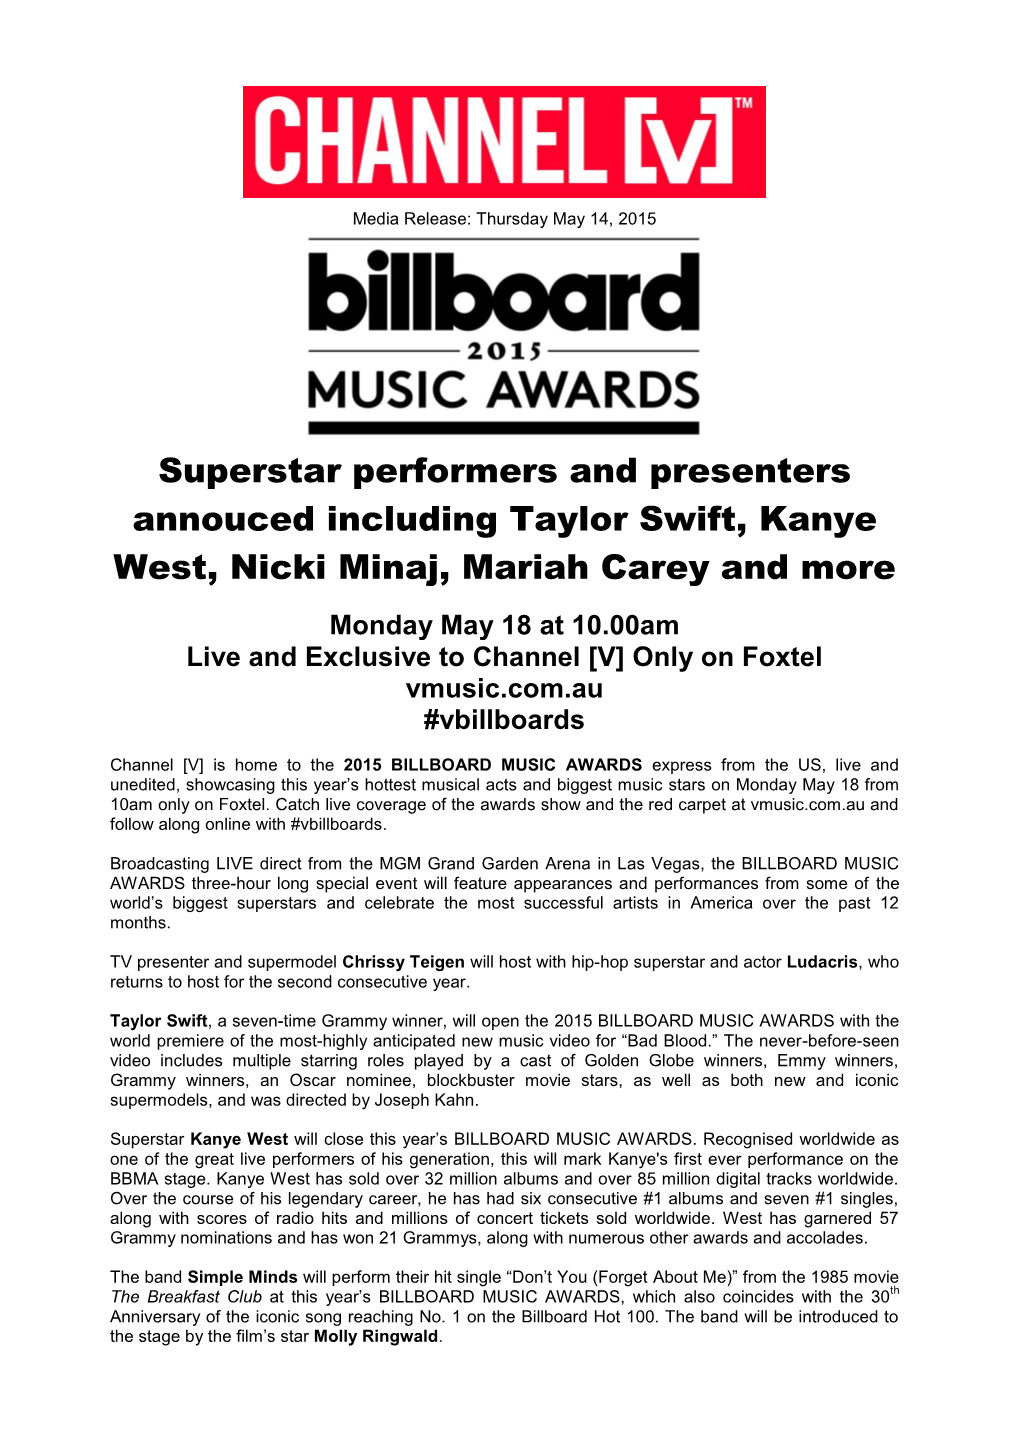 Superstar Performers and Presenters Annouced Including Taylor Swift, Kanye West, Nicki Minaj, Mariah Carey and More